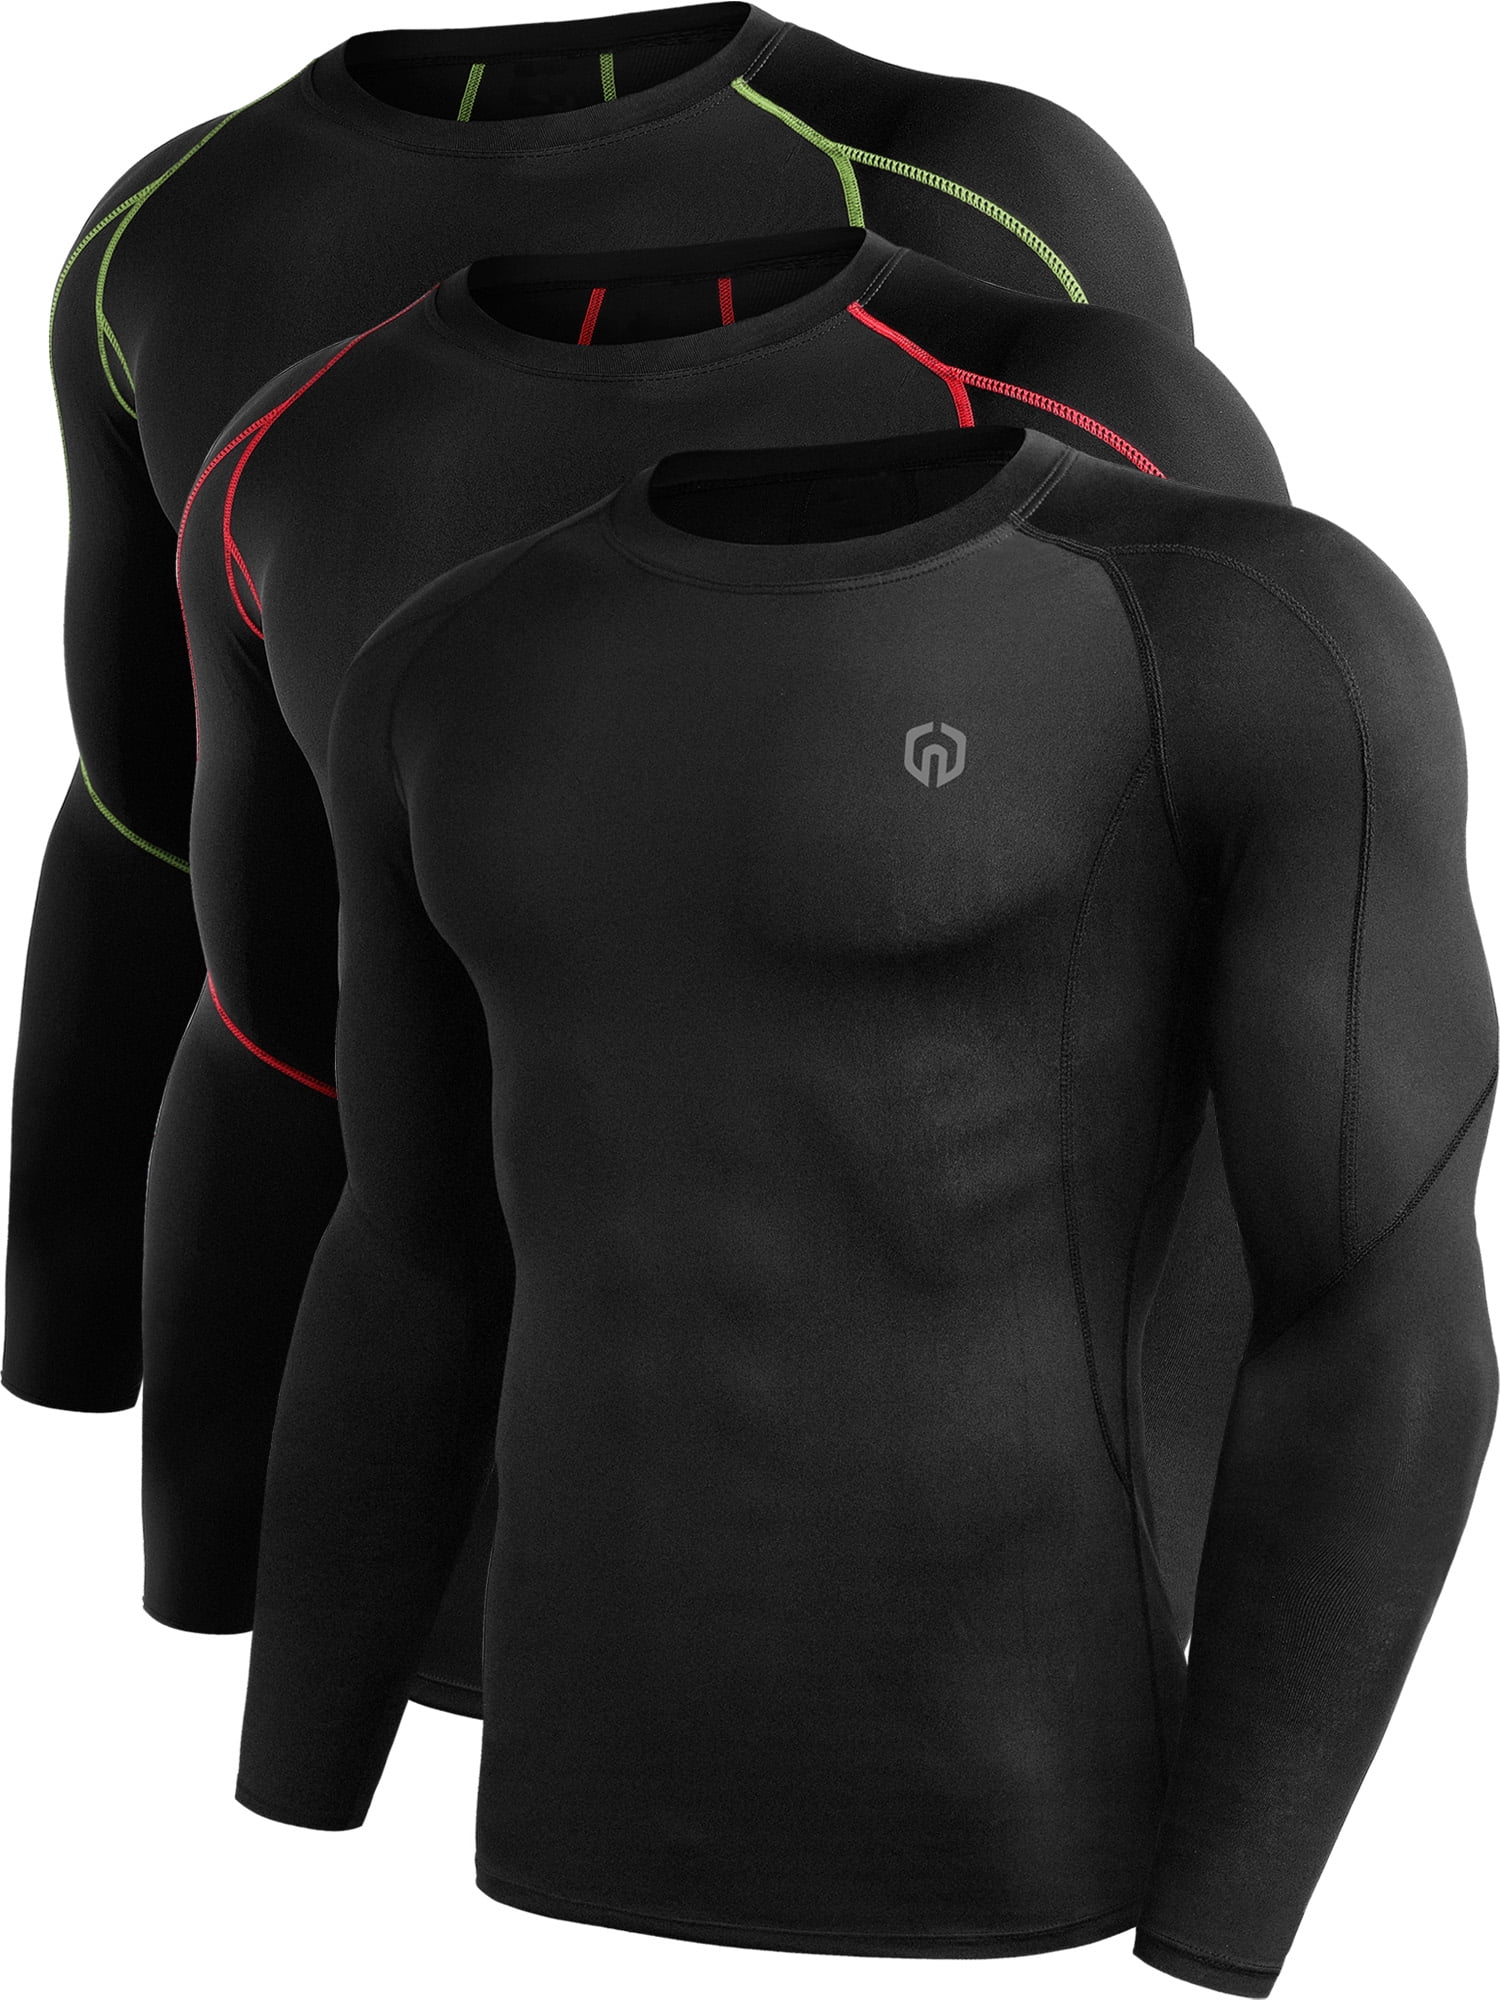 NELEUS Men Dry Fit Long Sleeve Compression Shirts Workout Running Shirts 3  Pack,Black+Black Red+Black Green,US Size M 